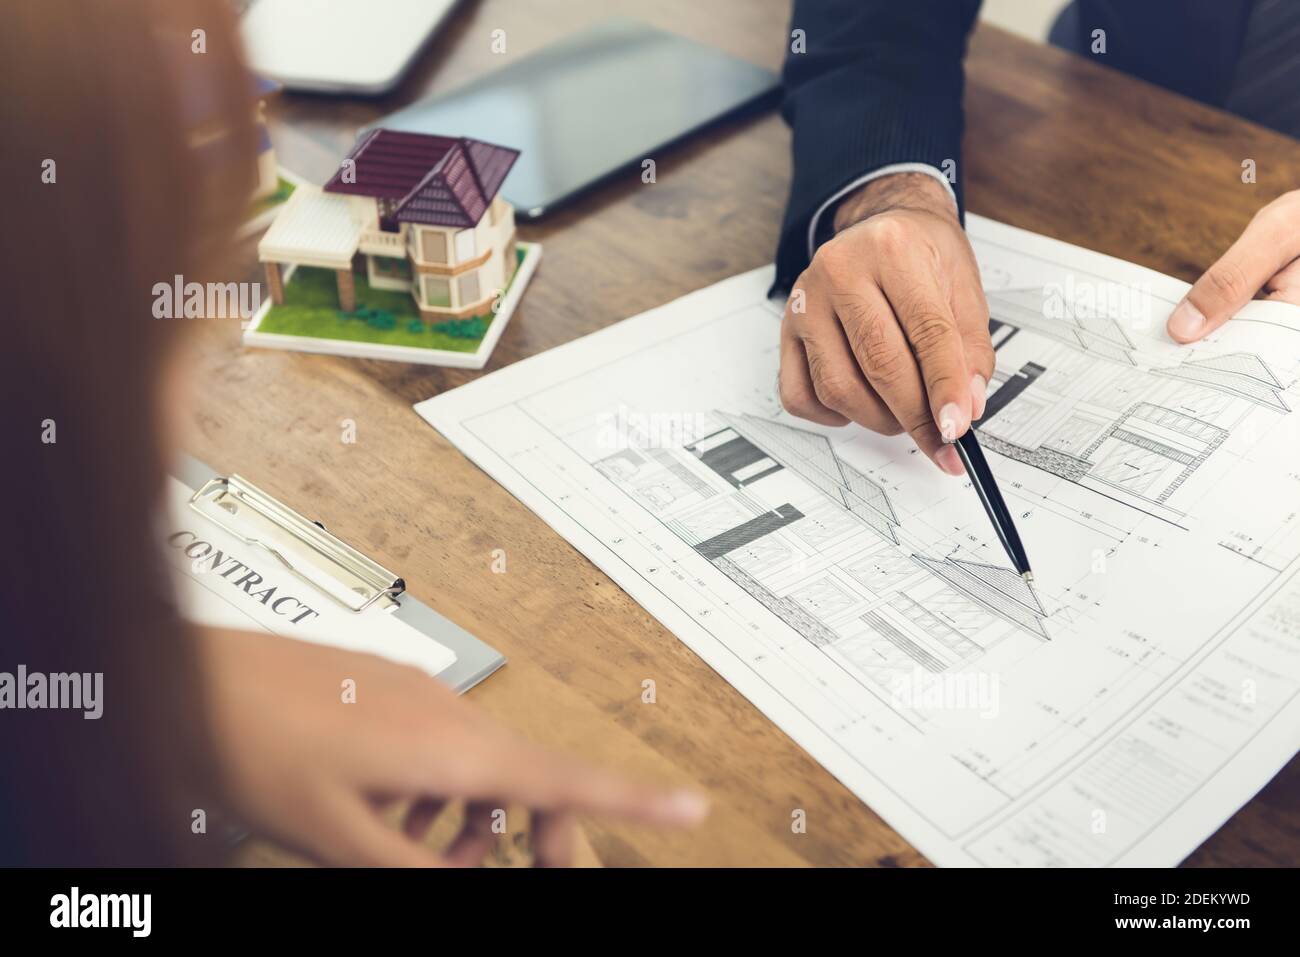 Developer holding and explaining a housing concept to a business woman client for real estate development purposes with a contract agreement proposal Stock Photo